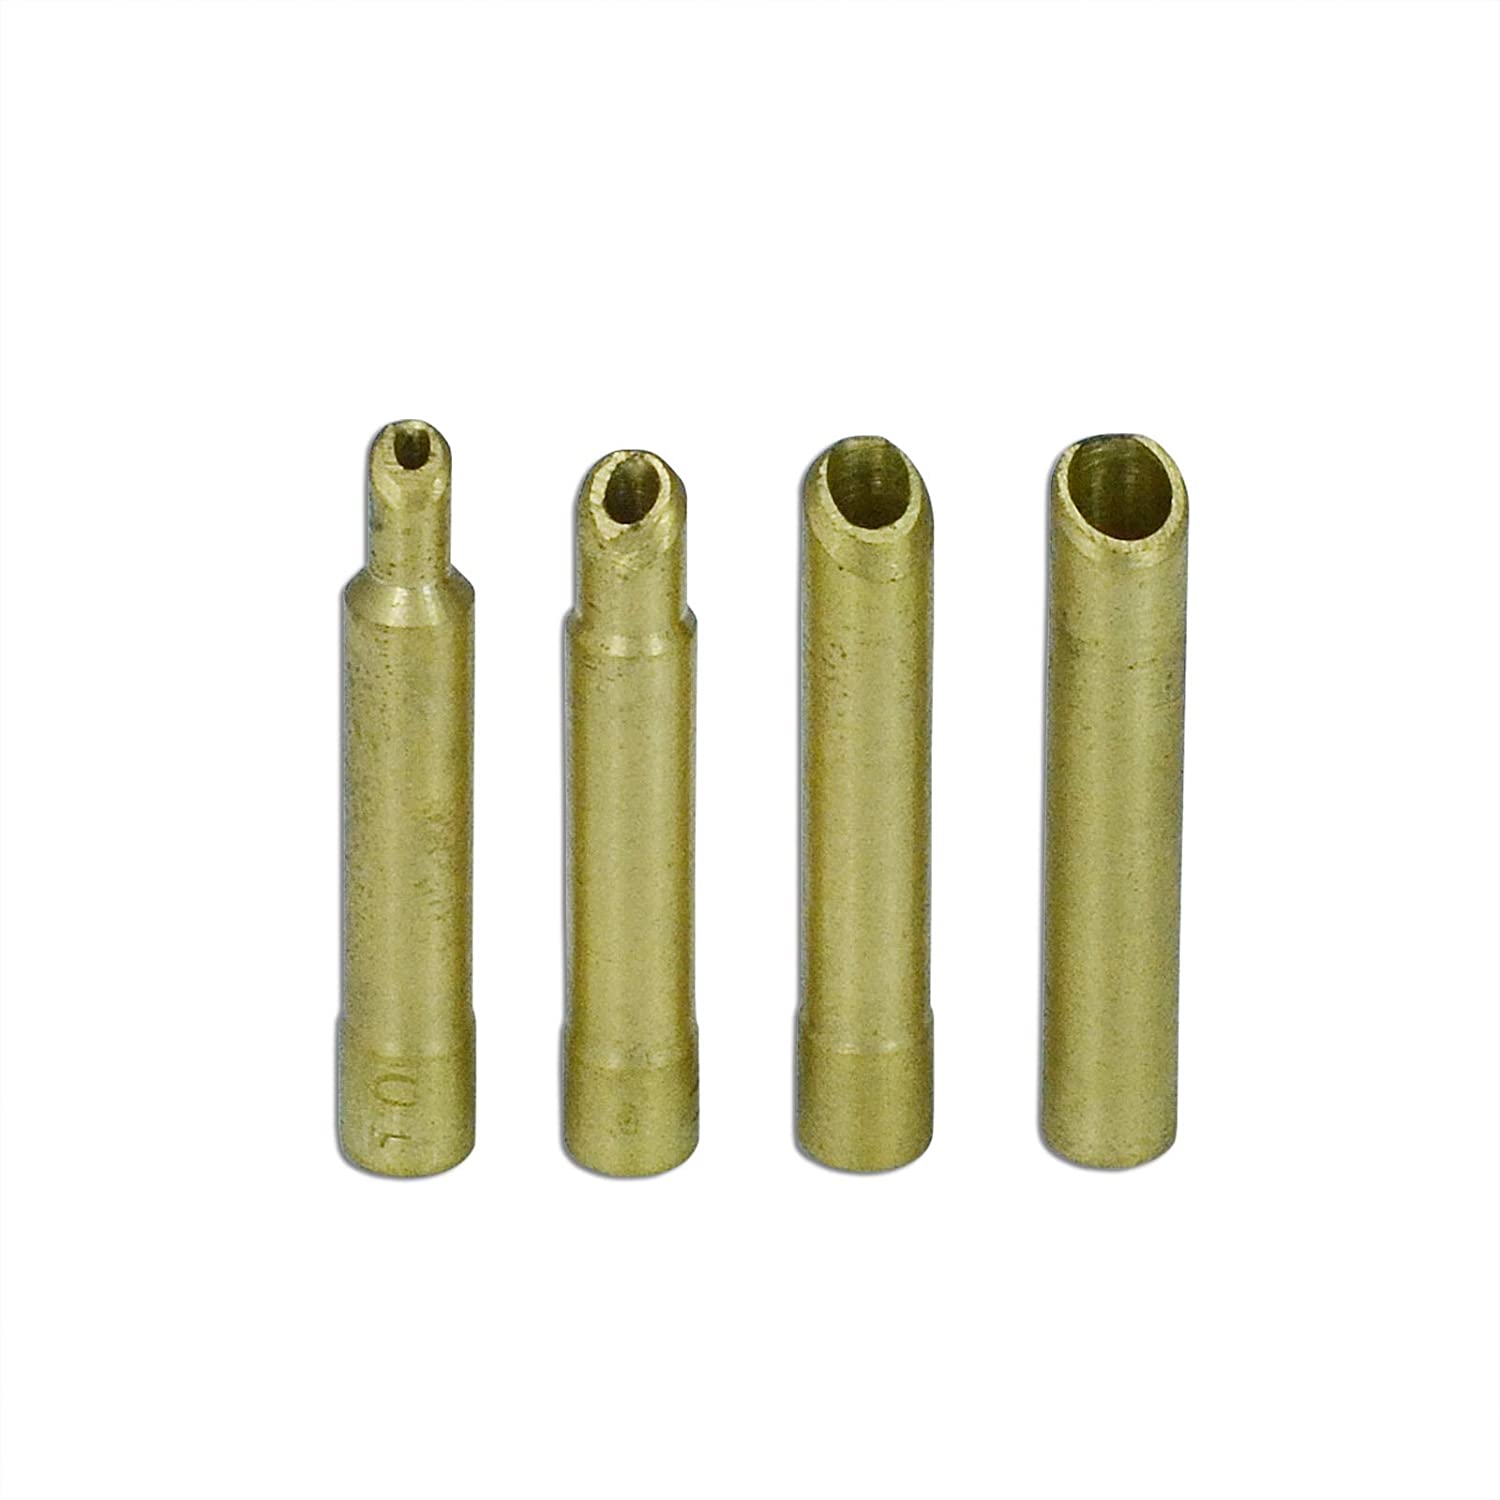 Wedge Collet Tungsten Adapters/Gas Saver (0.040“ 1/16” 3/32“ 1/8") Kit for WP SR 9 20 25 TIG Welding Torch 4pcs